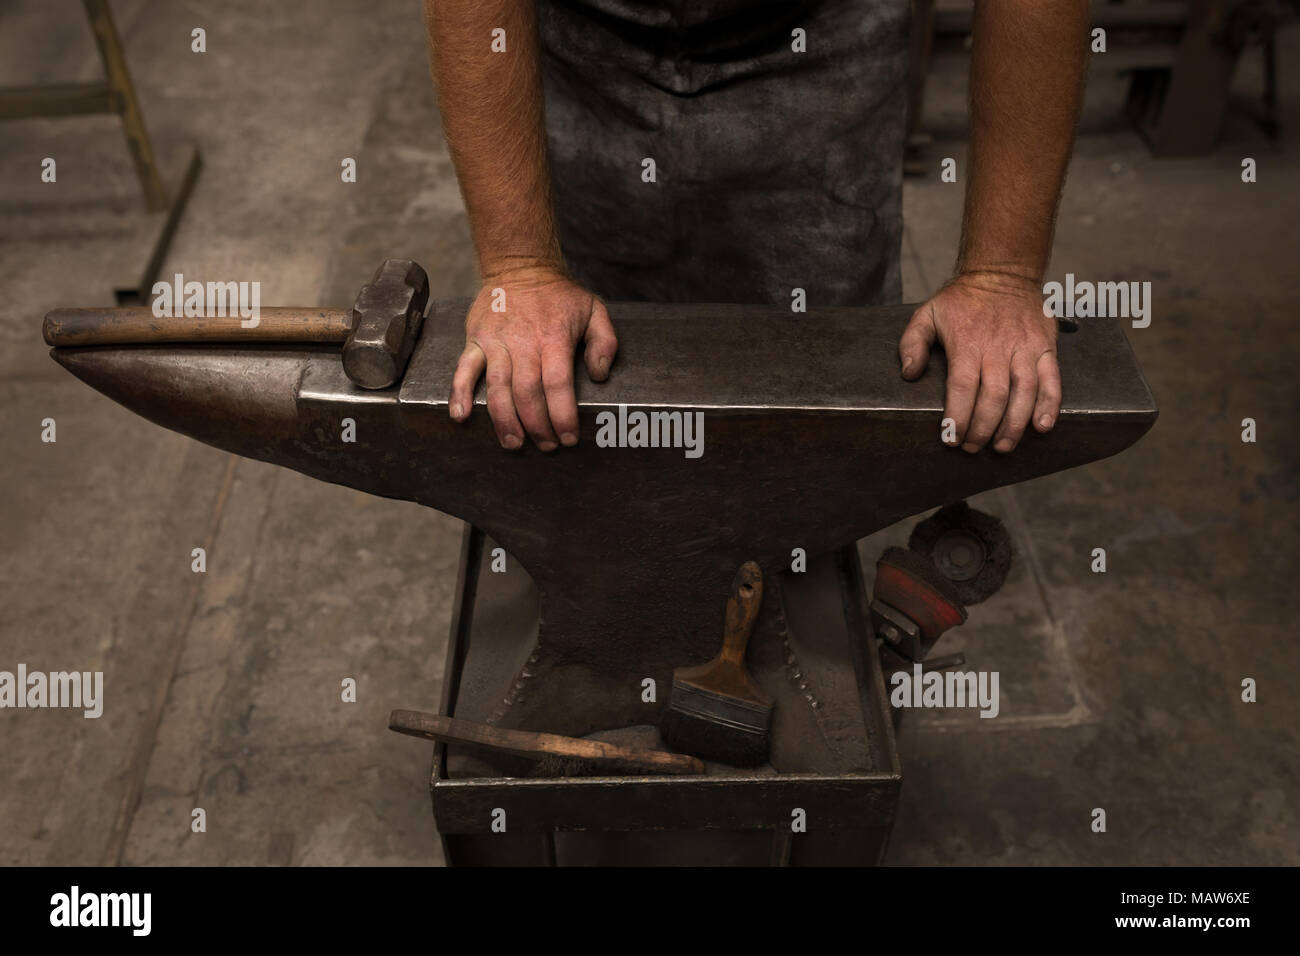 Blacksmith standing with hands on anvil Stock Photo